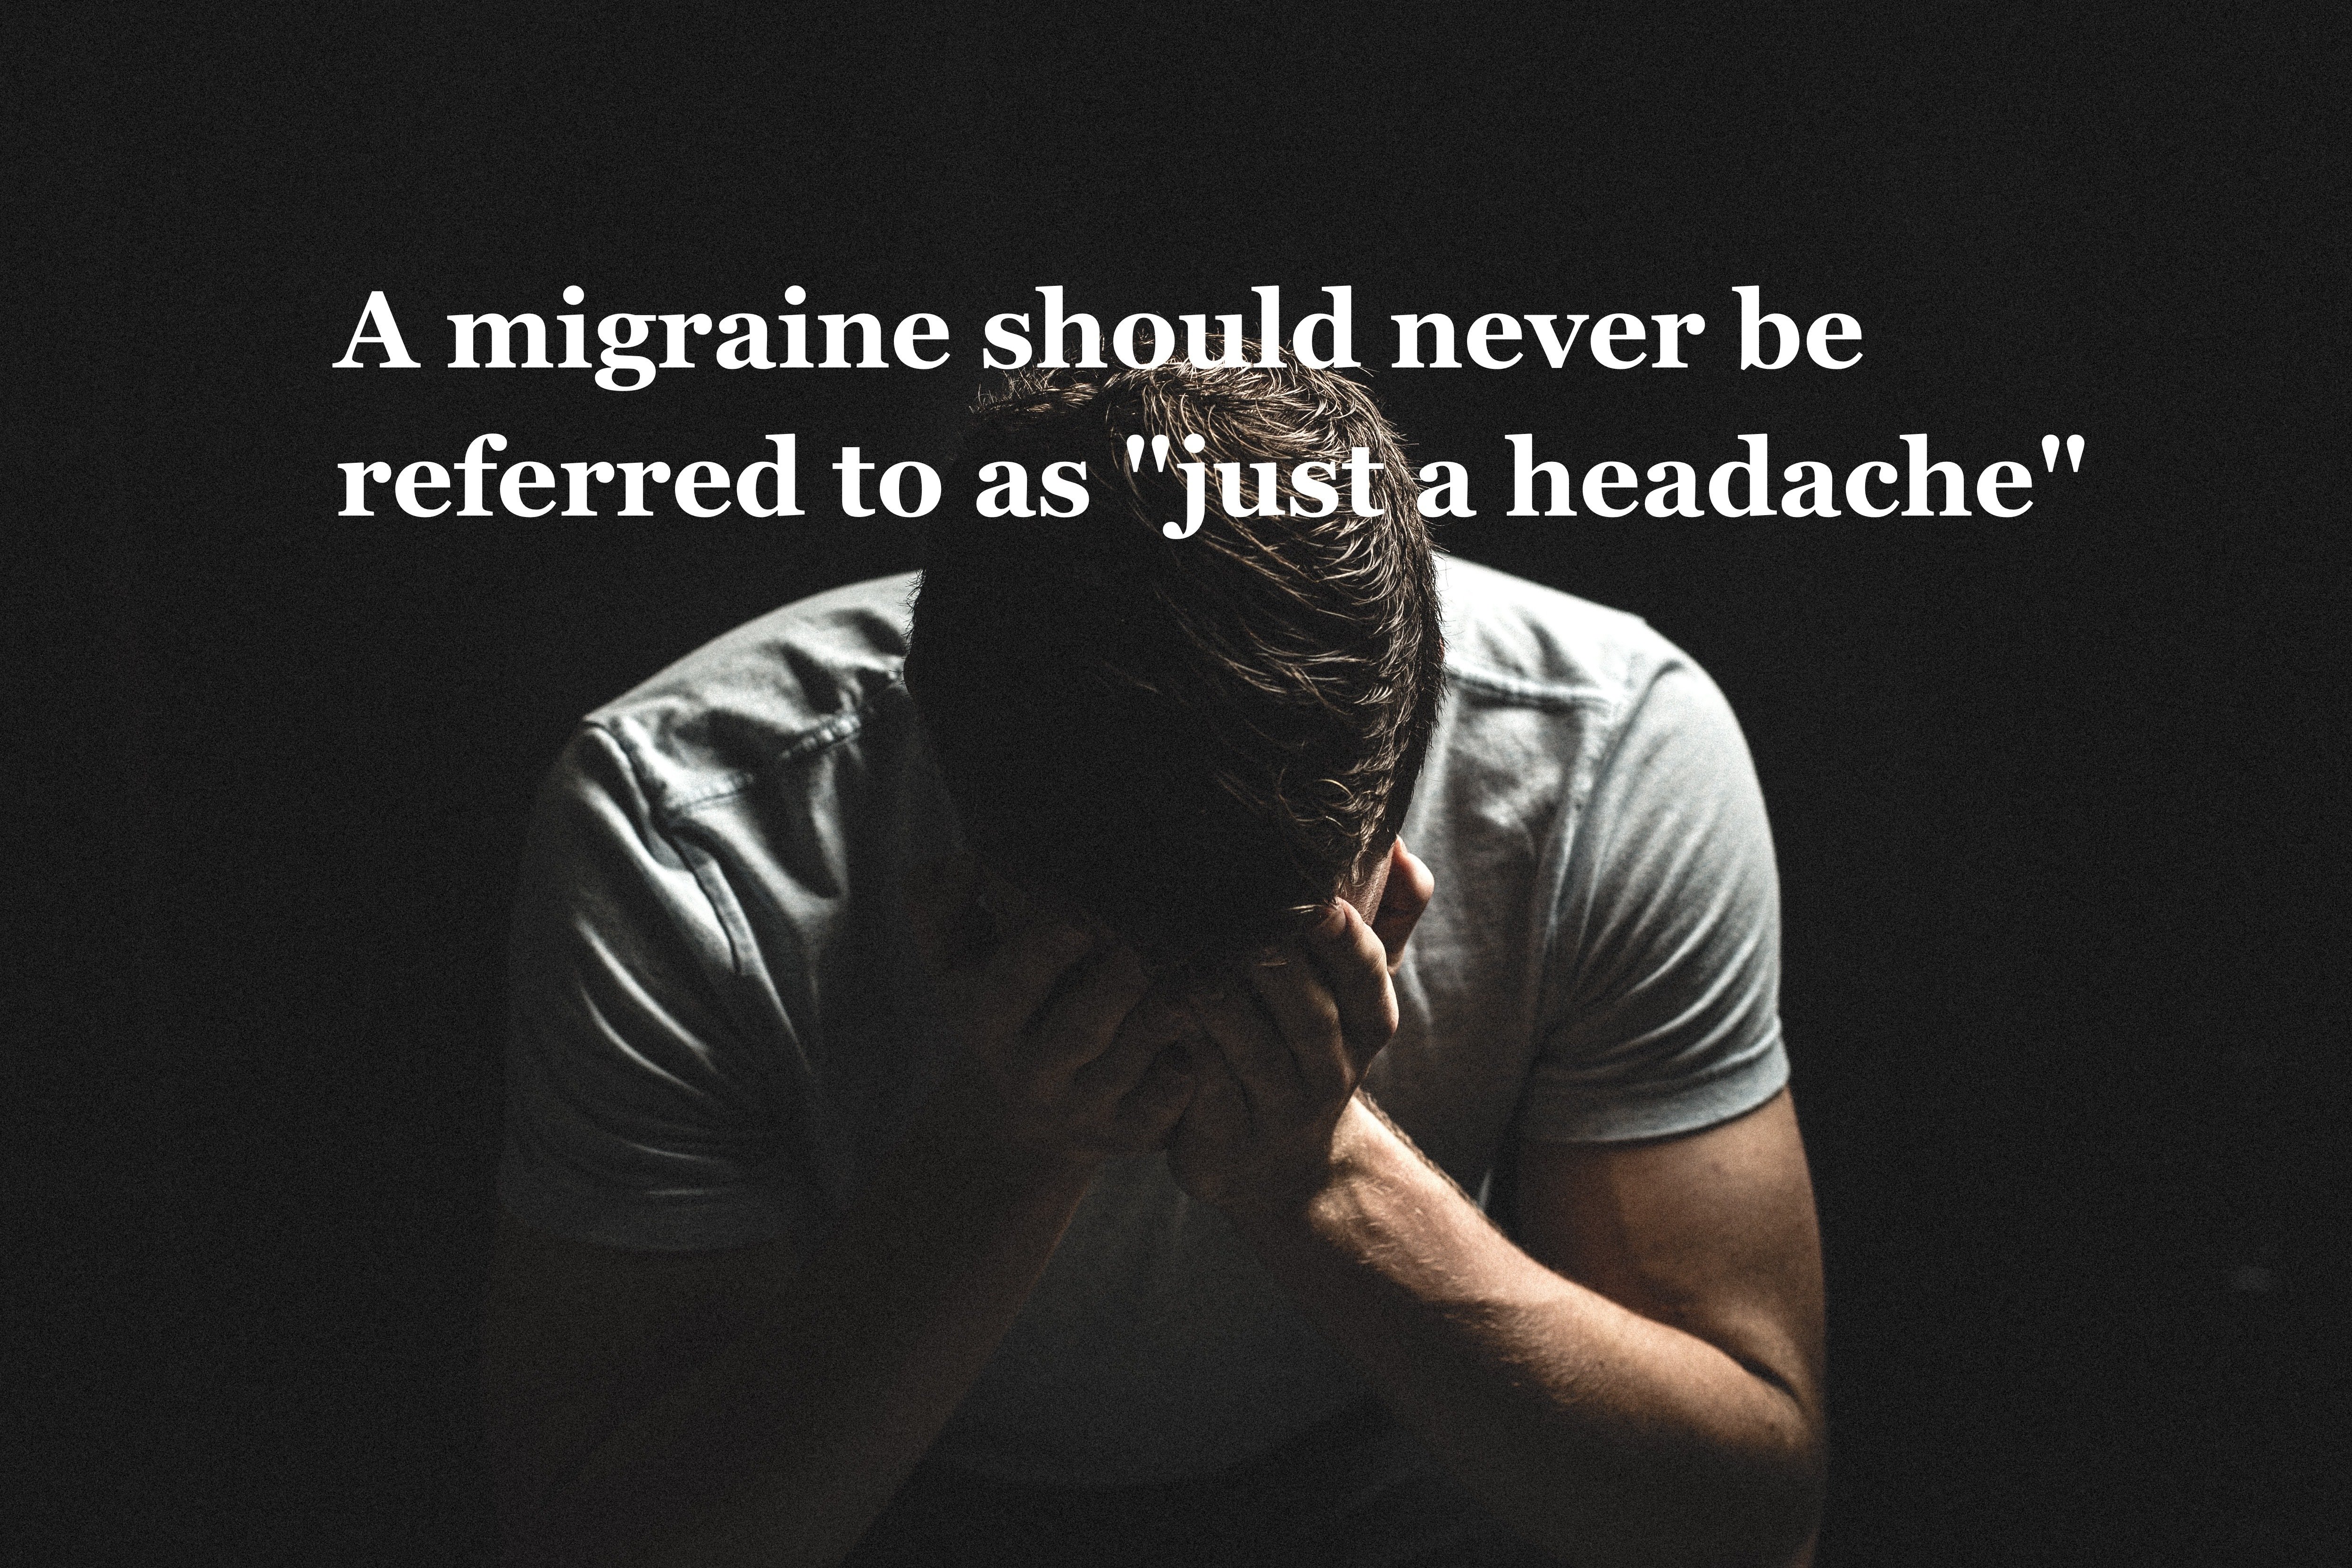 7 Things Only Migraineurs Can Highly Relate To